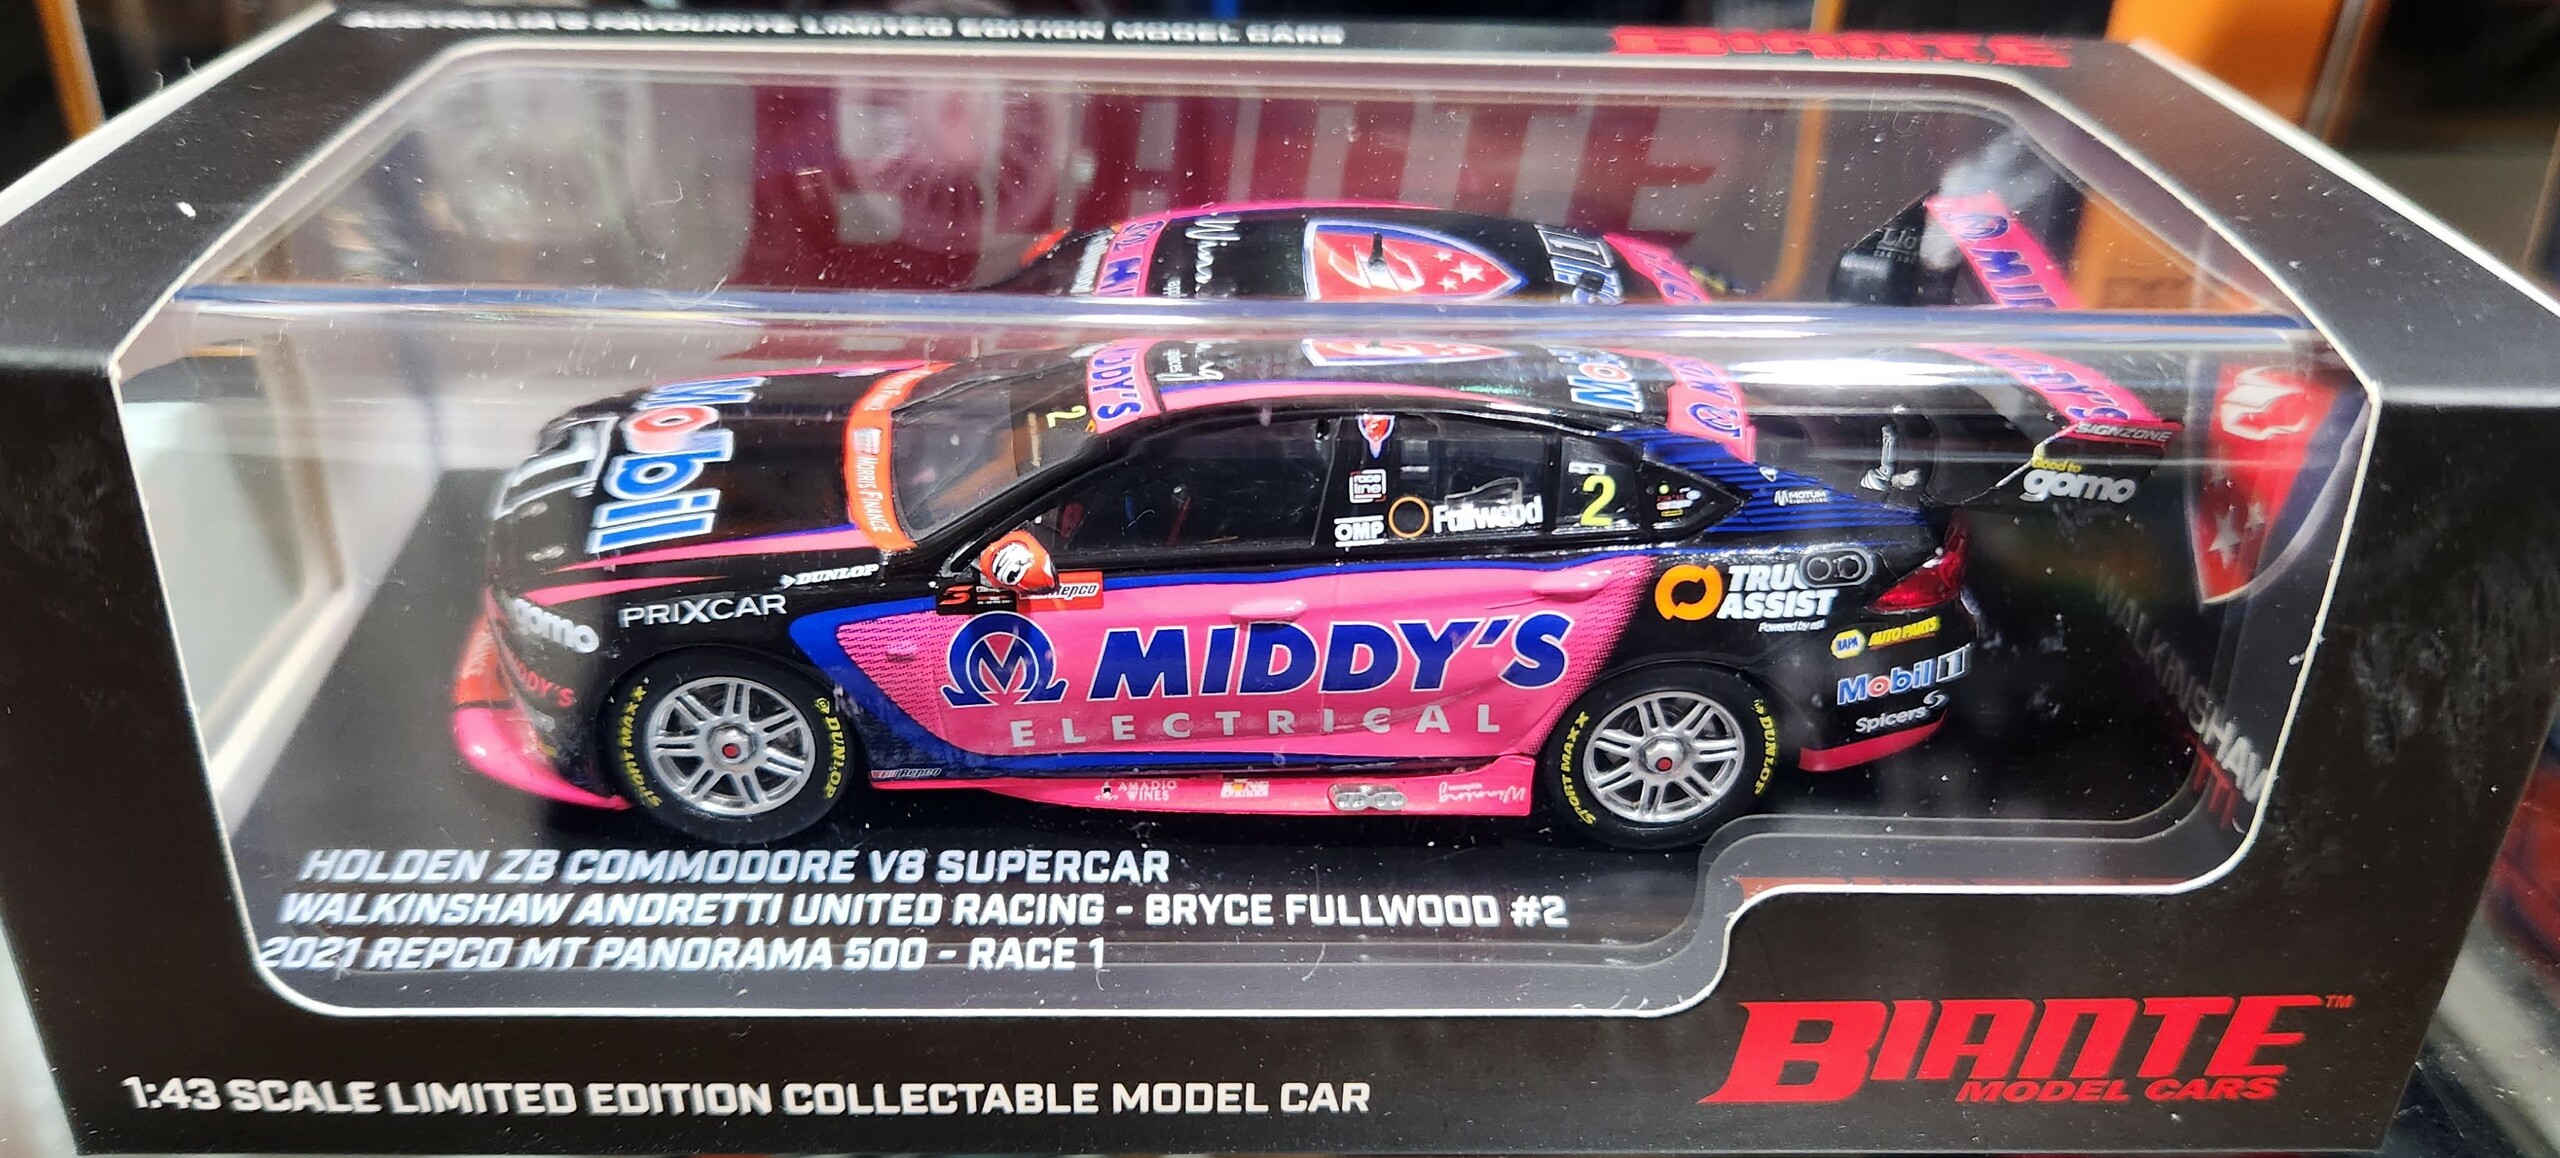 Holden ZB Commodore Bryce Fullwood Mobil 1 Middys Racing Race 1 2021 Repco Mt Panorama 500 Biante 1/43